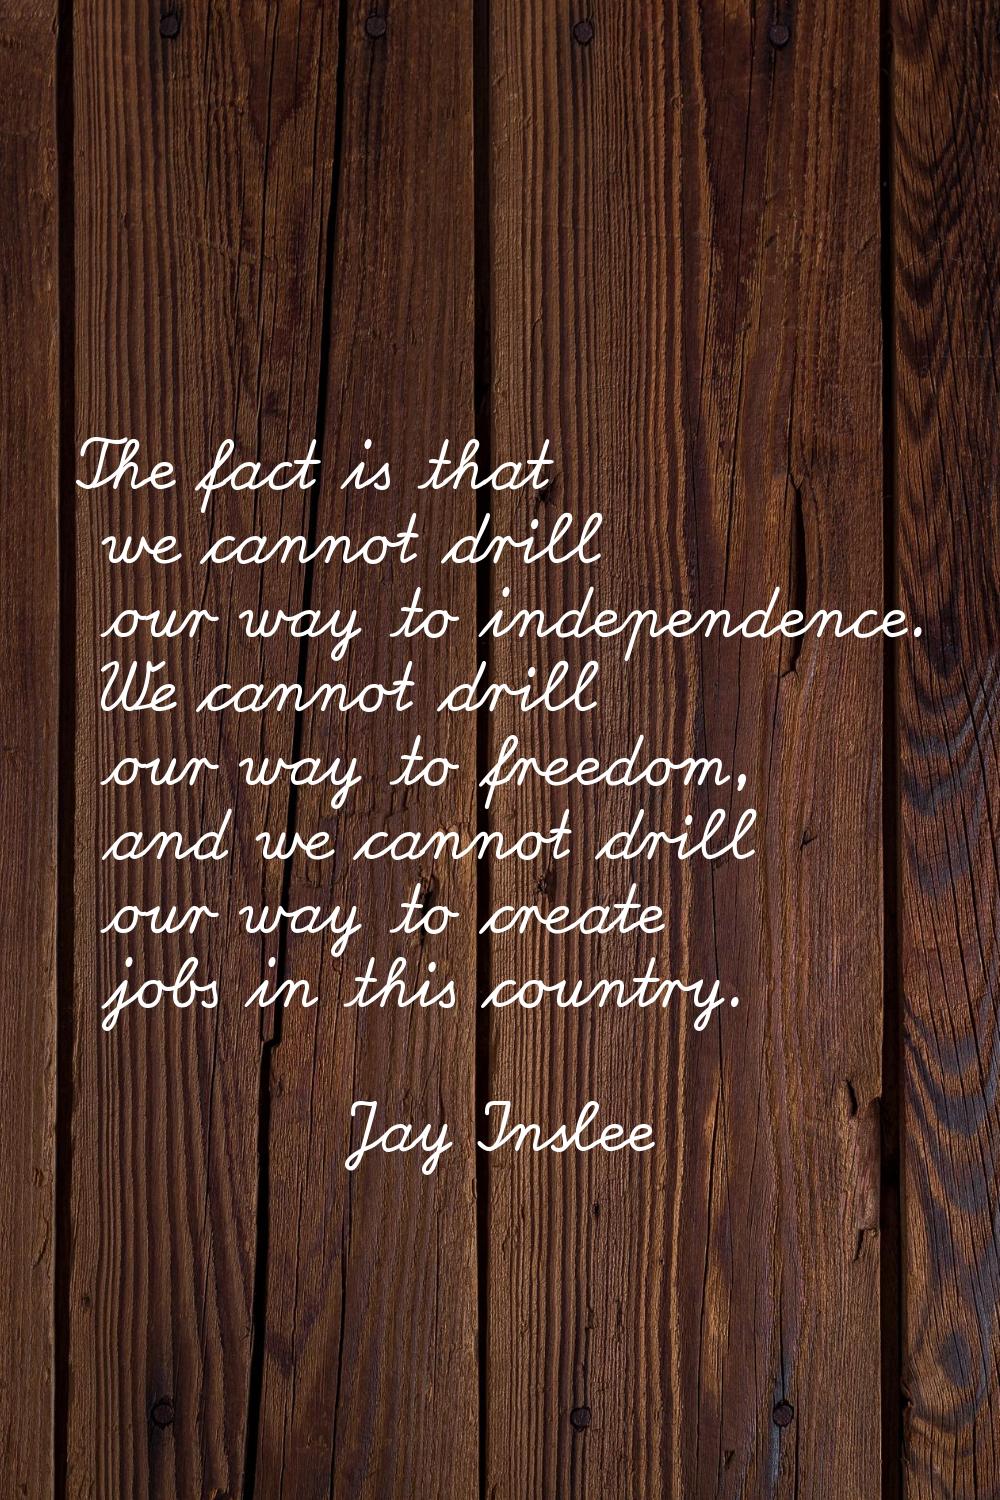 The fact is that we cannot drill our way to independence. We cannot drill our way to freedom, and w